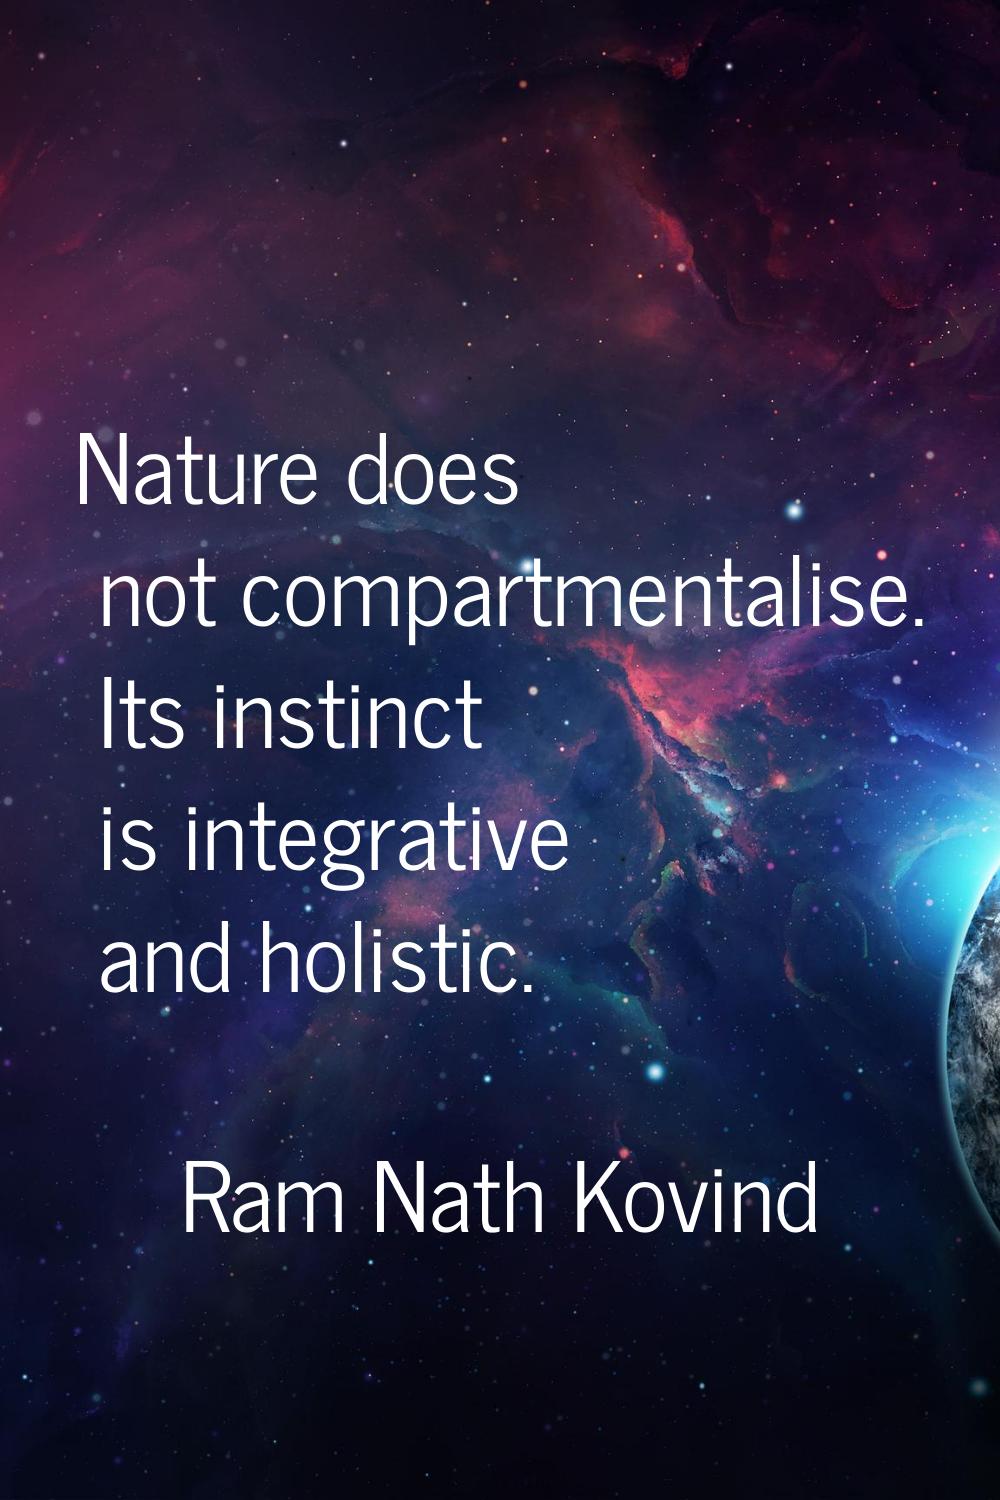 Nature does not compartmentalise. Its instinct is integrative and holistic.